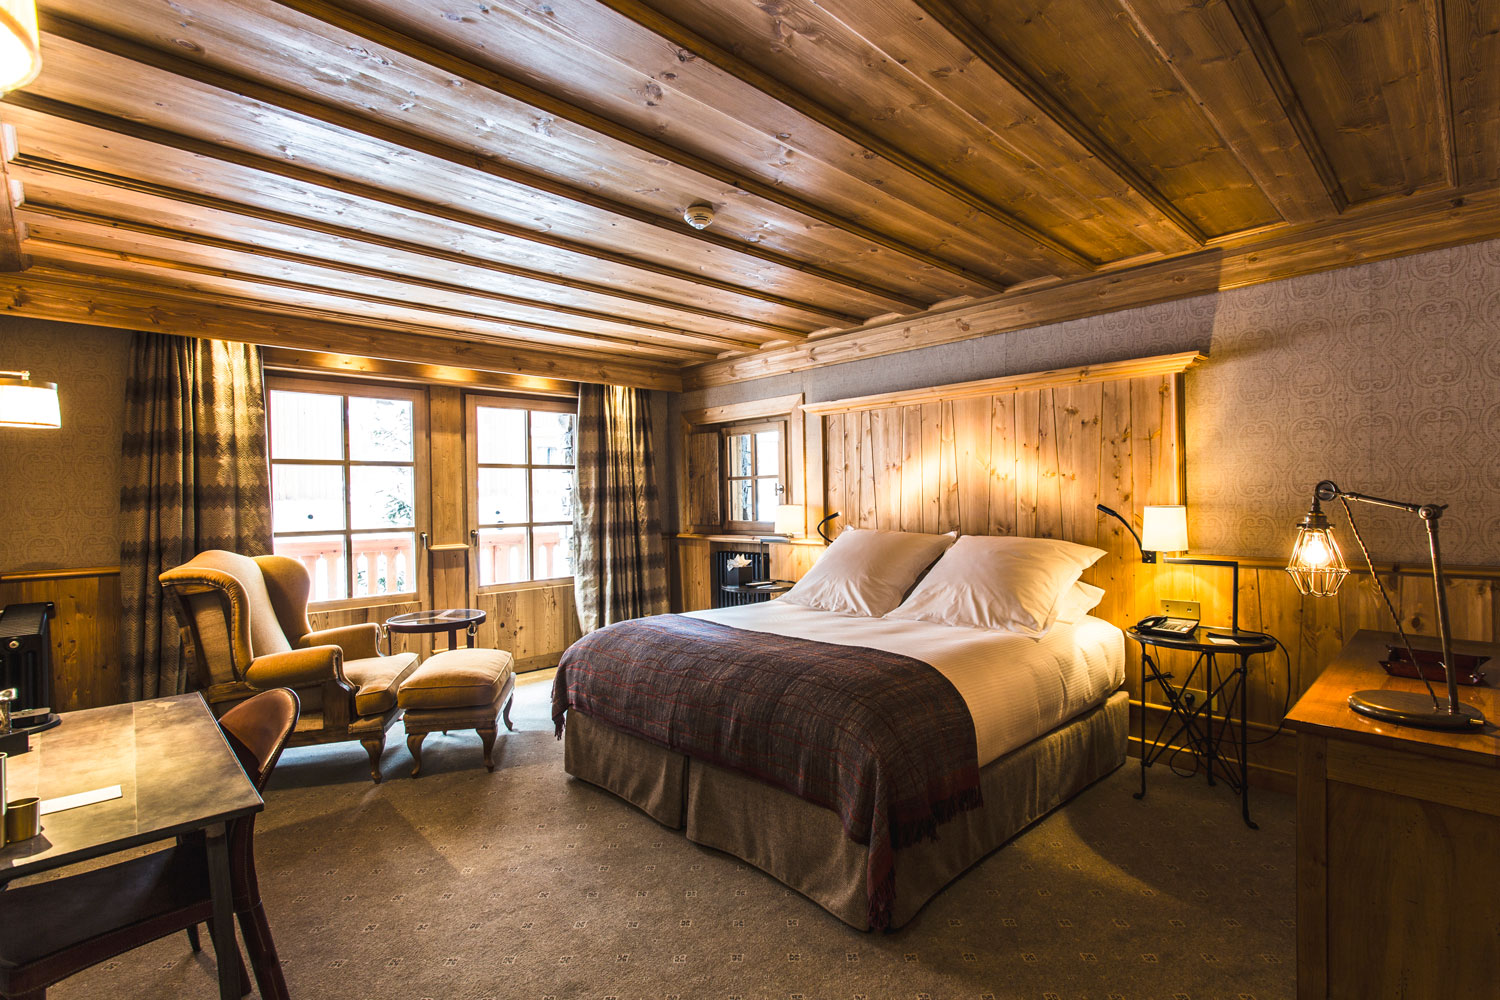 Industrial lighting helps create a home away home in this Alpine mountain hotel